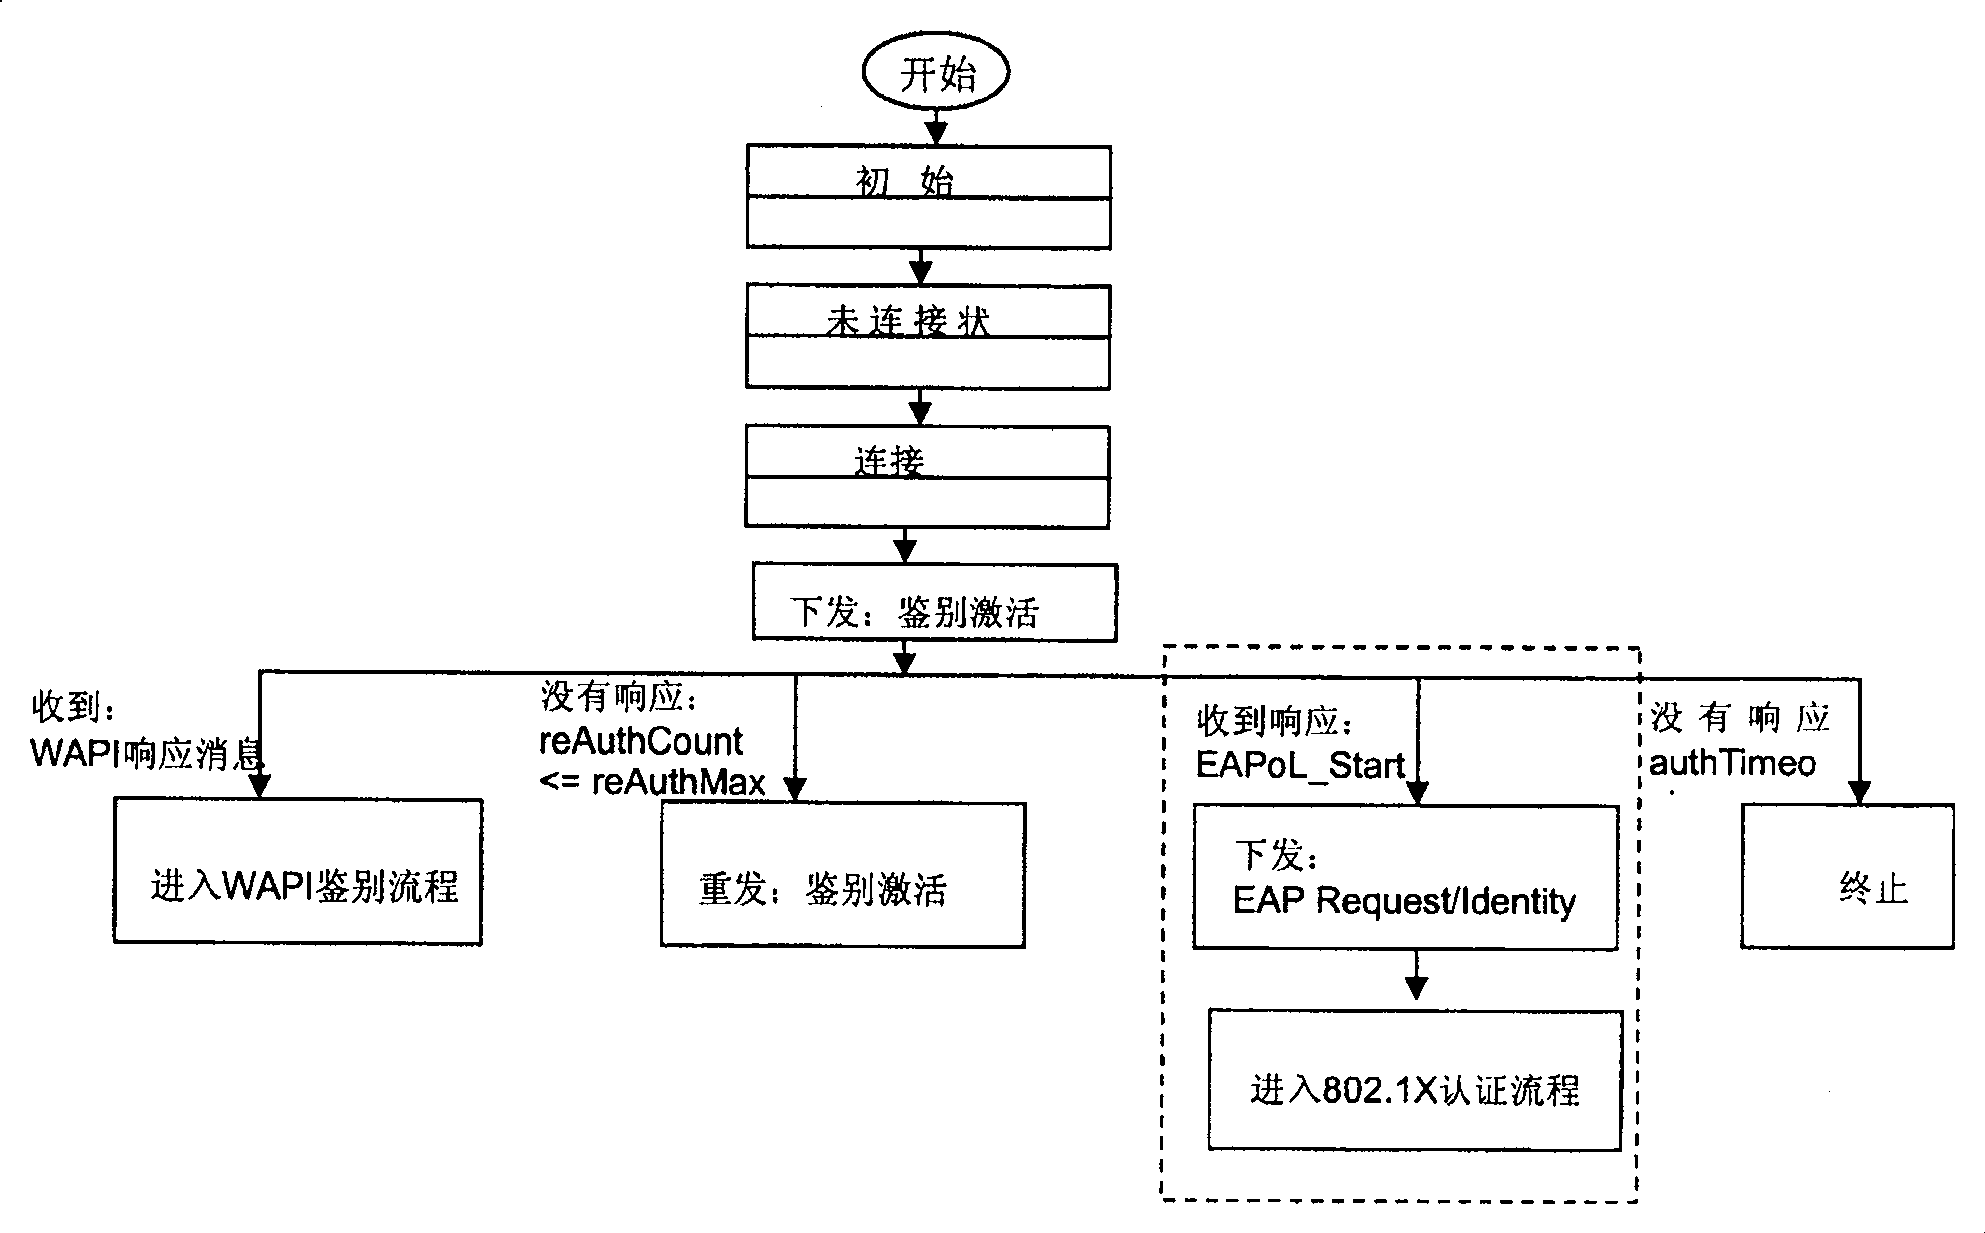 Method for implementing compatibility between WAPI protocol and 802.1X protocol